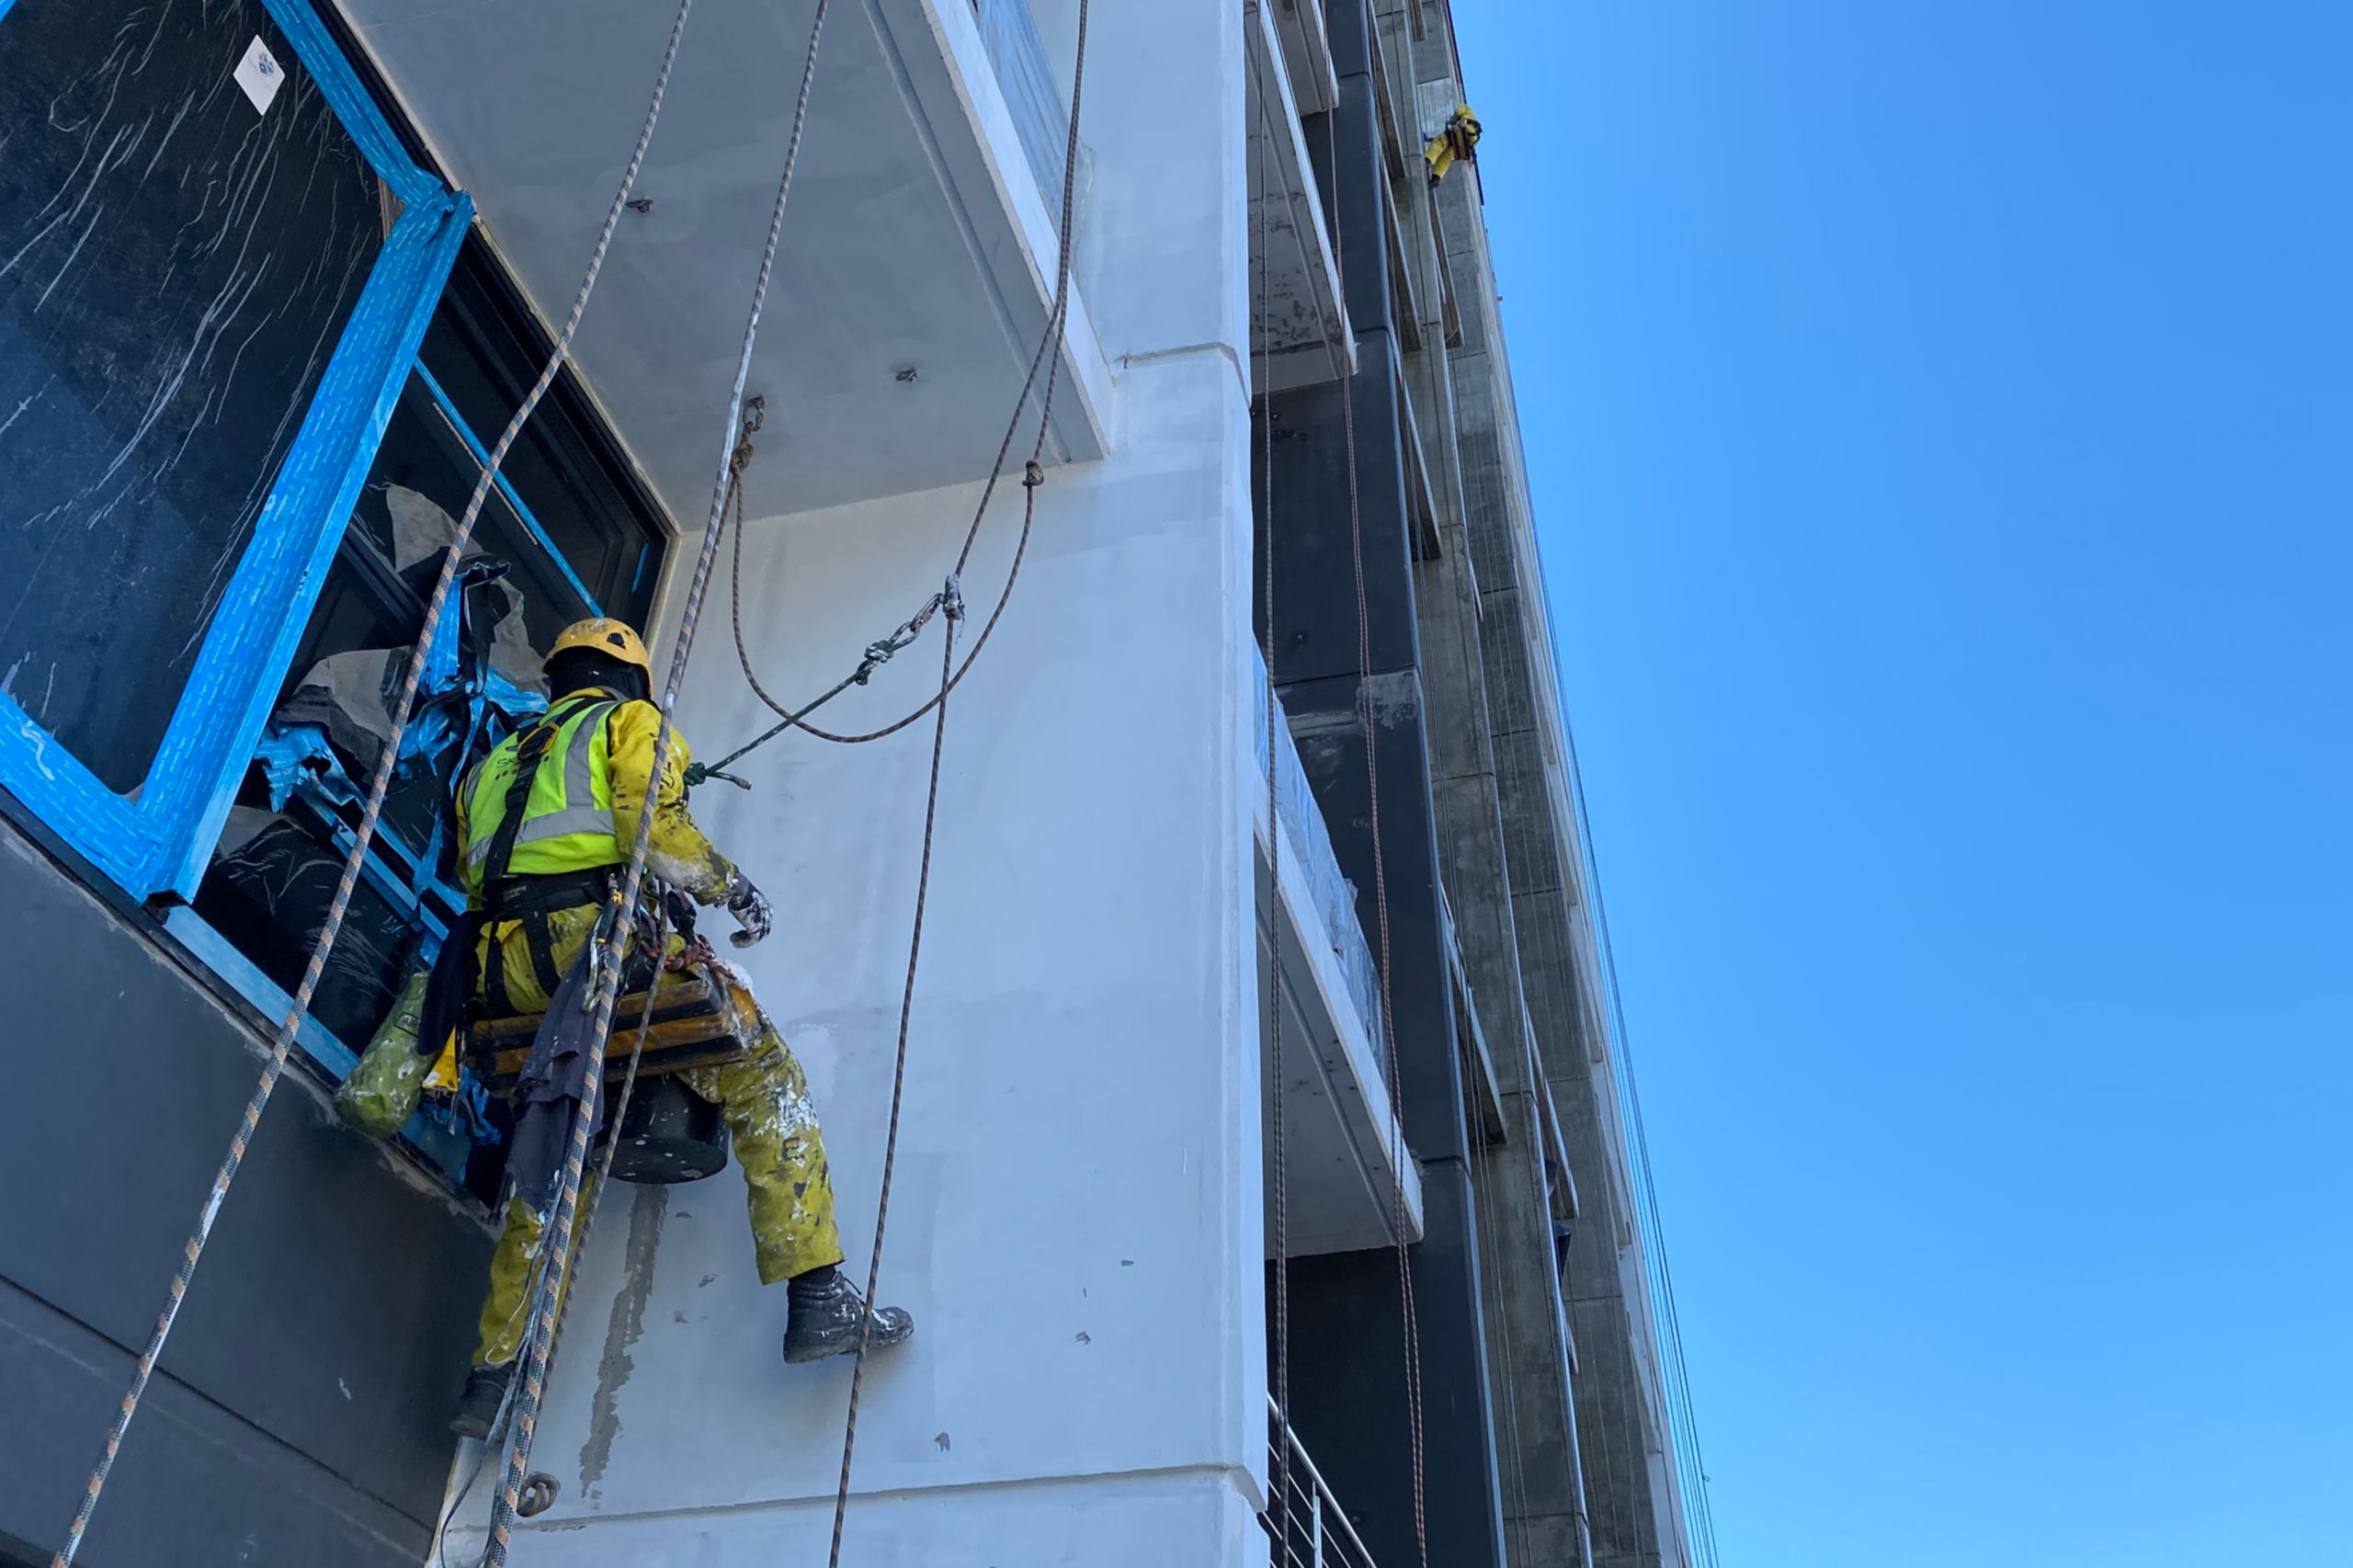 Sika products specified for concrete repair, structural strengthening and crack bridging for tallest building in Cape Town - 16 on Bree Street